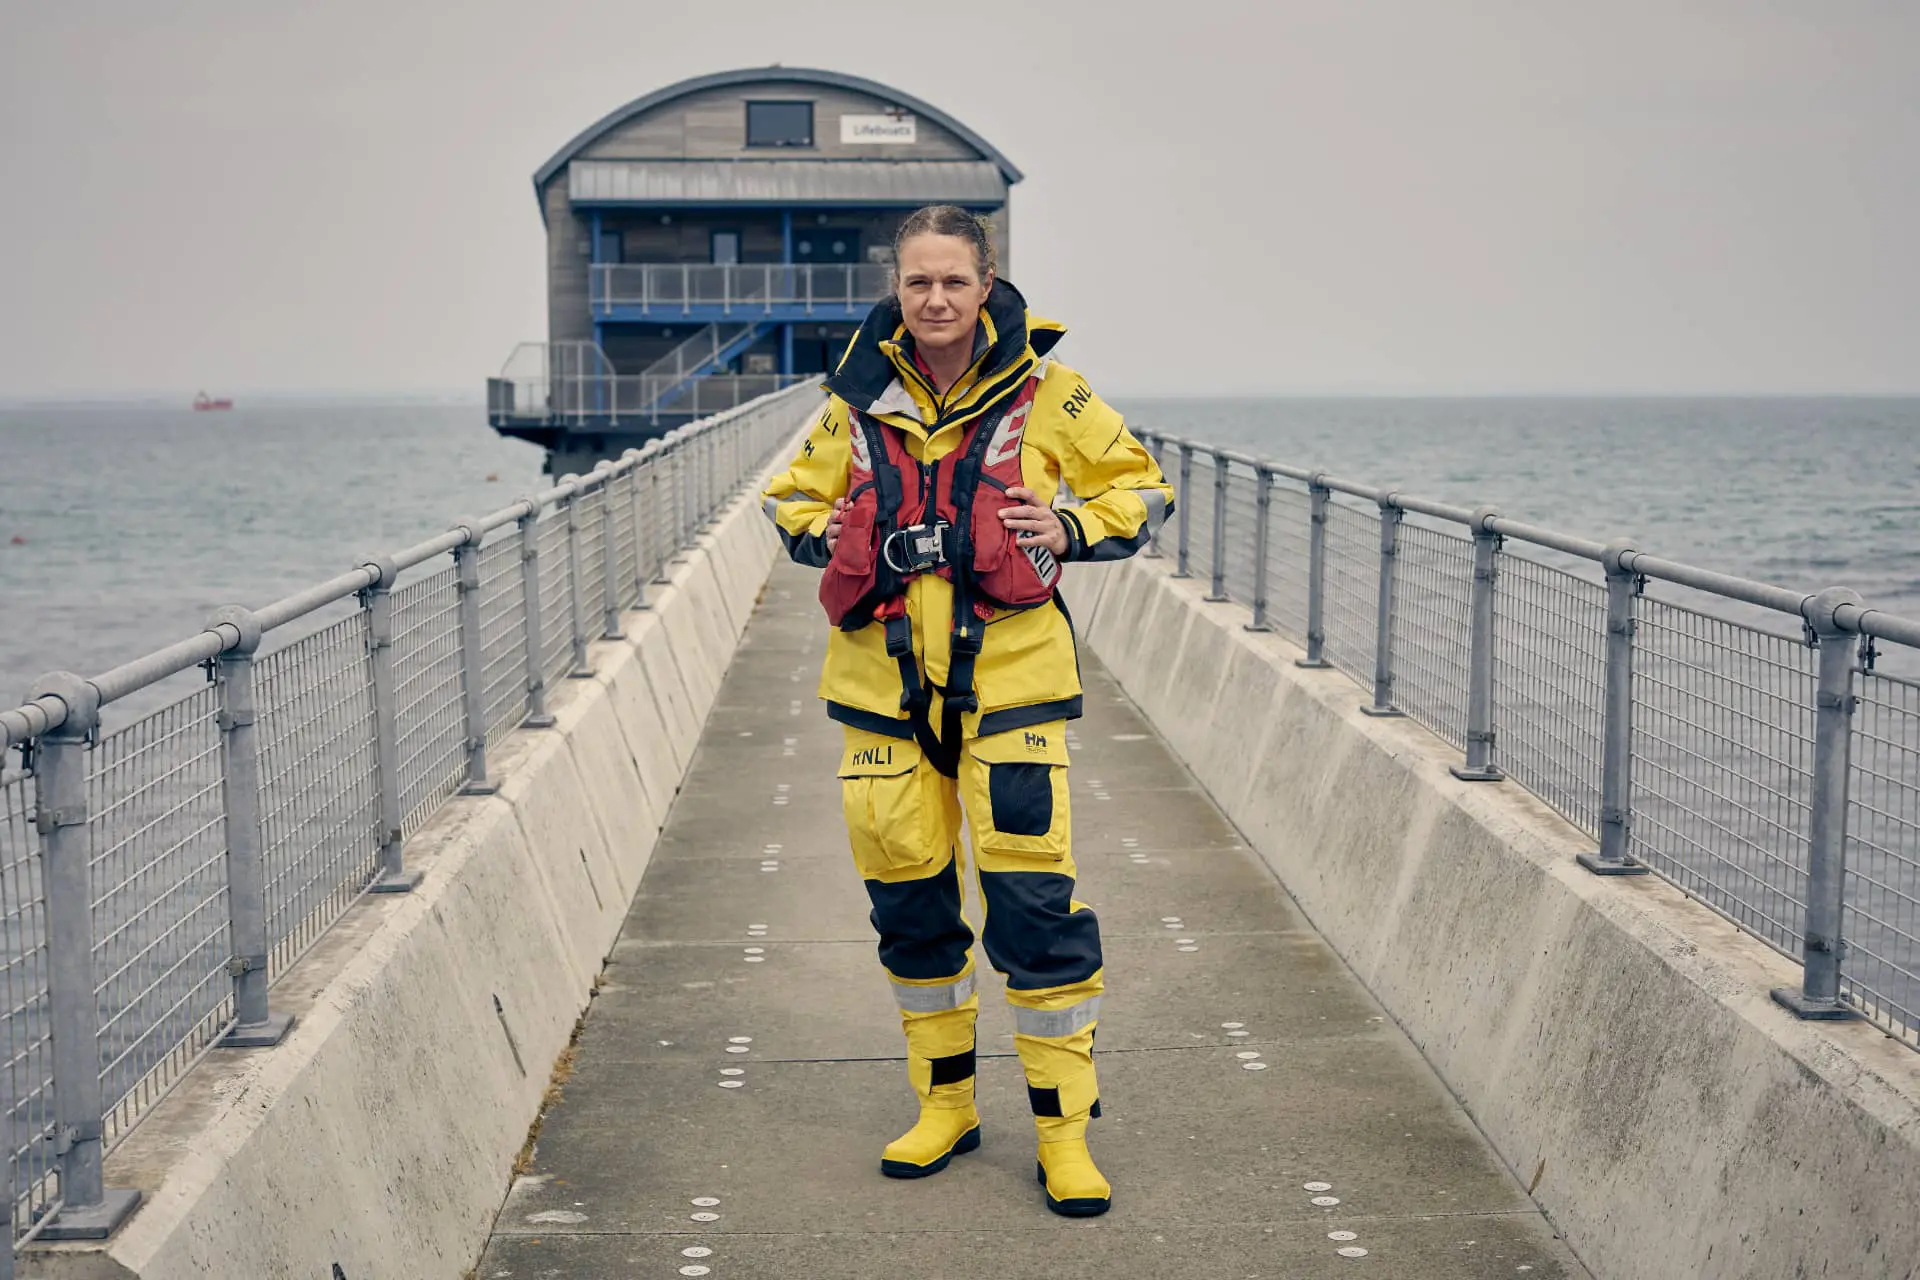 Dawn Hodge, First female Helm of Bembridge RNLI Inshore Lifeboat photographed by Tom Harrison